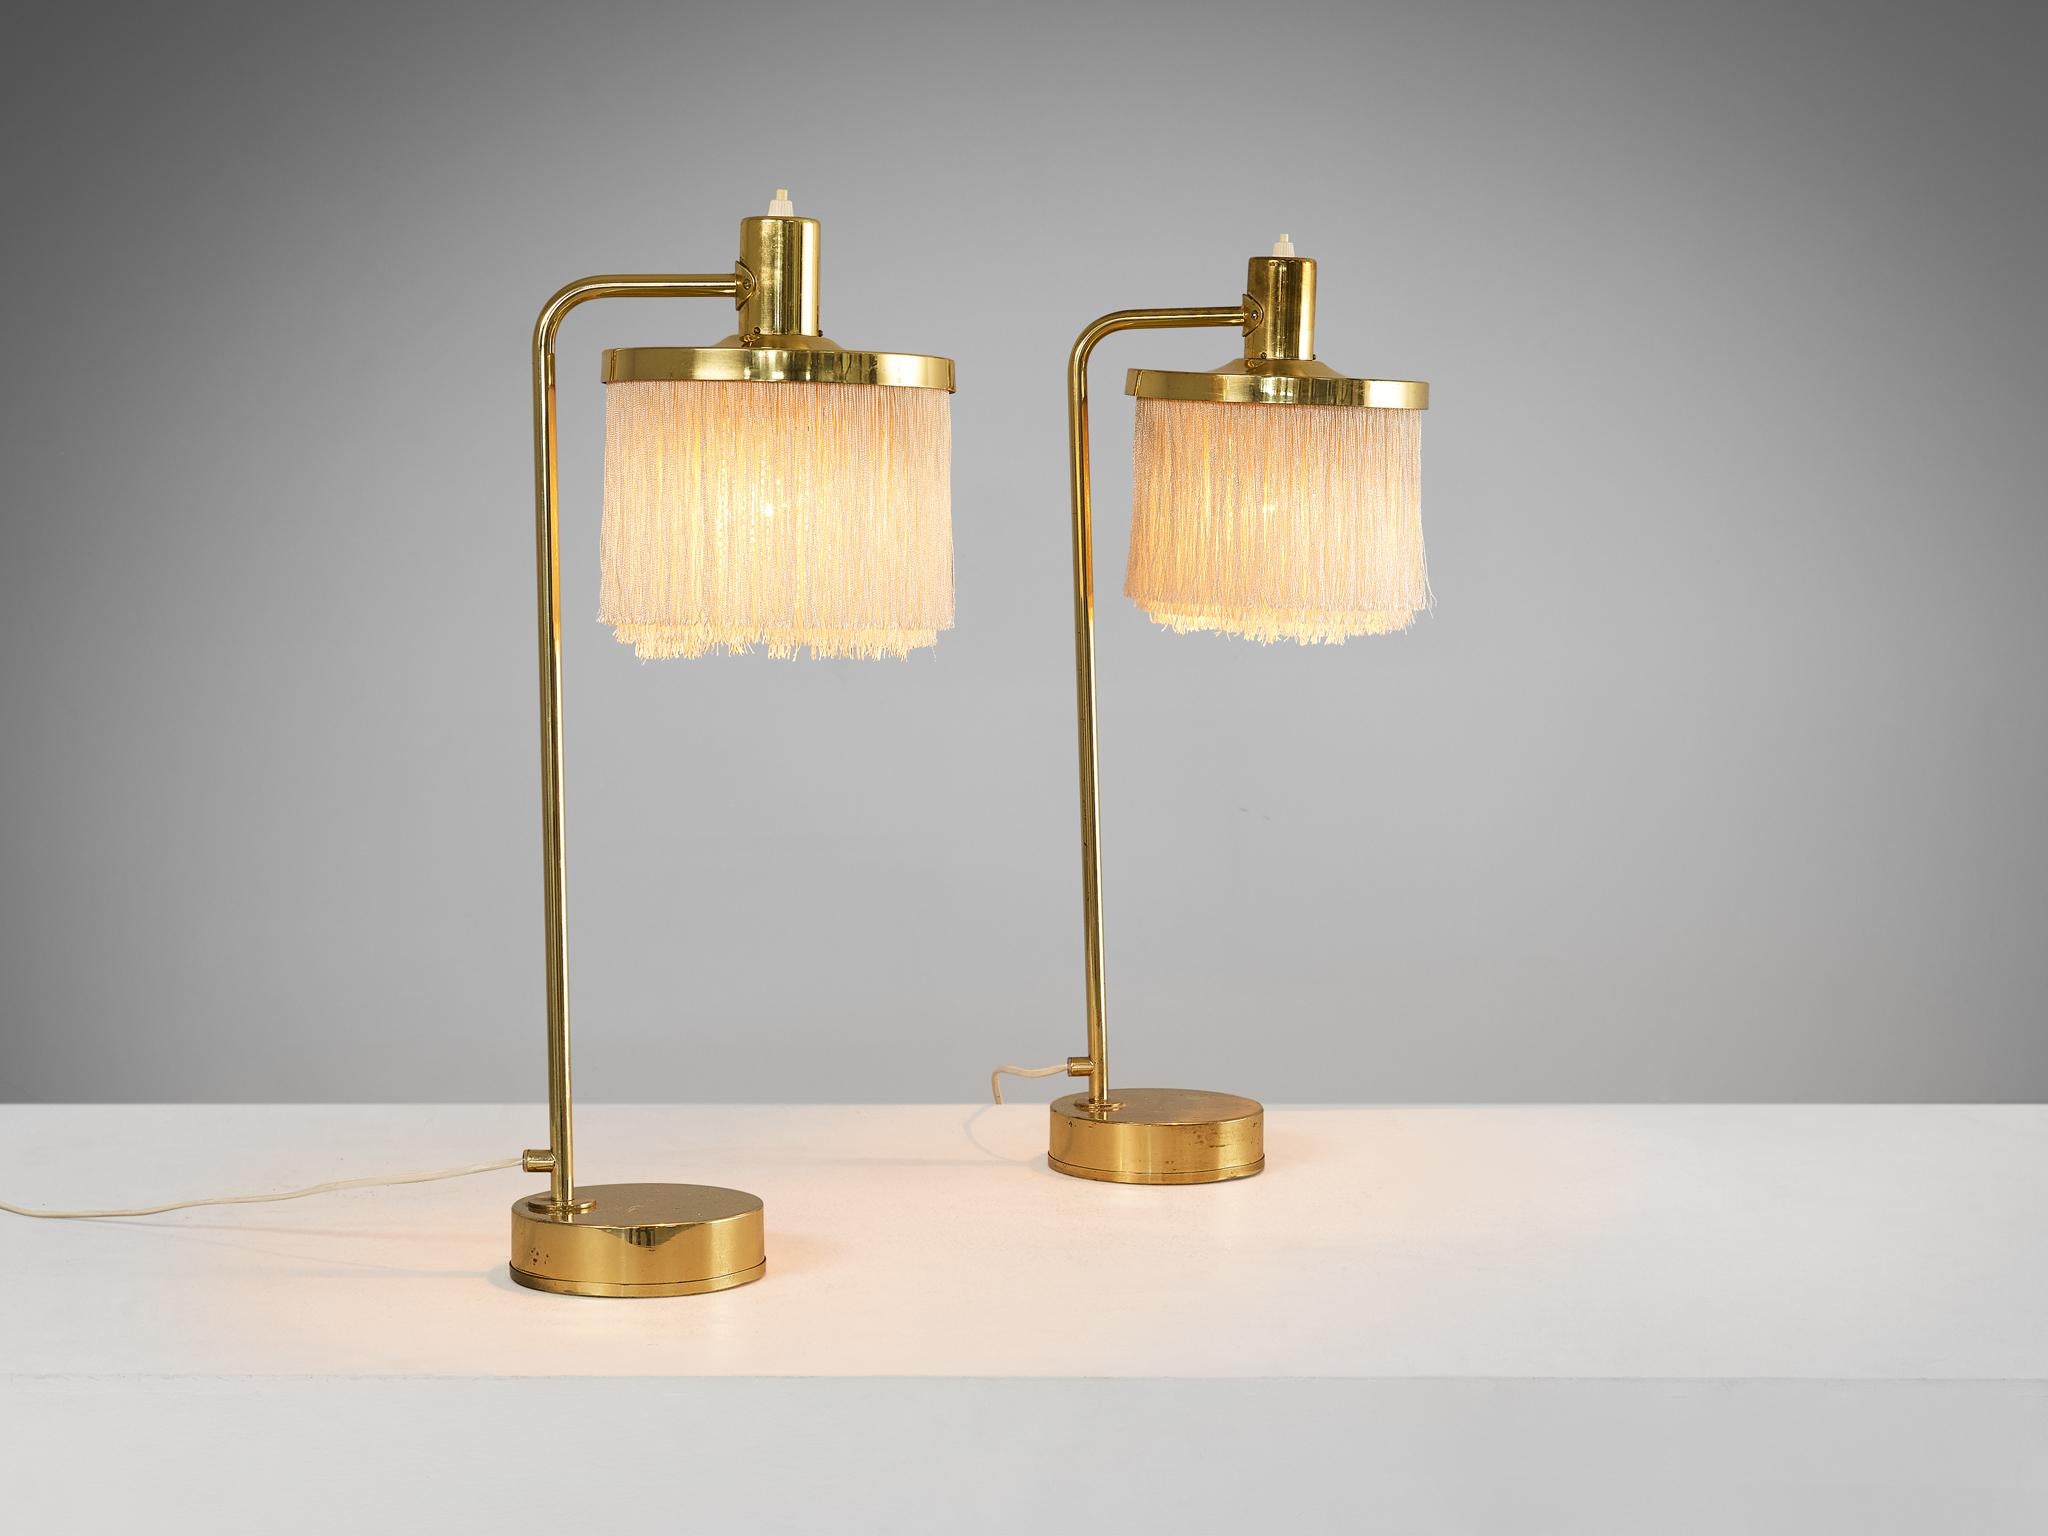 Hans-Agne Jakobsson for Hans-Agne Jakobsson AB in Markaryd, Sweden, pair of 'Fringe' table lamps, model B-140, brass, silk, Sweden, 1960s 

These extravagant desk lights are composed of an elegant curved arm, which holds a pendant adorned with